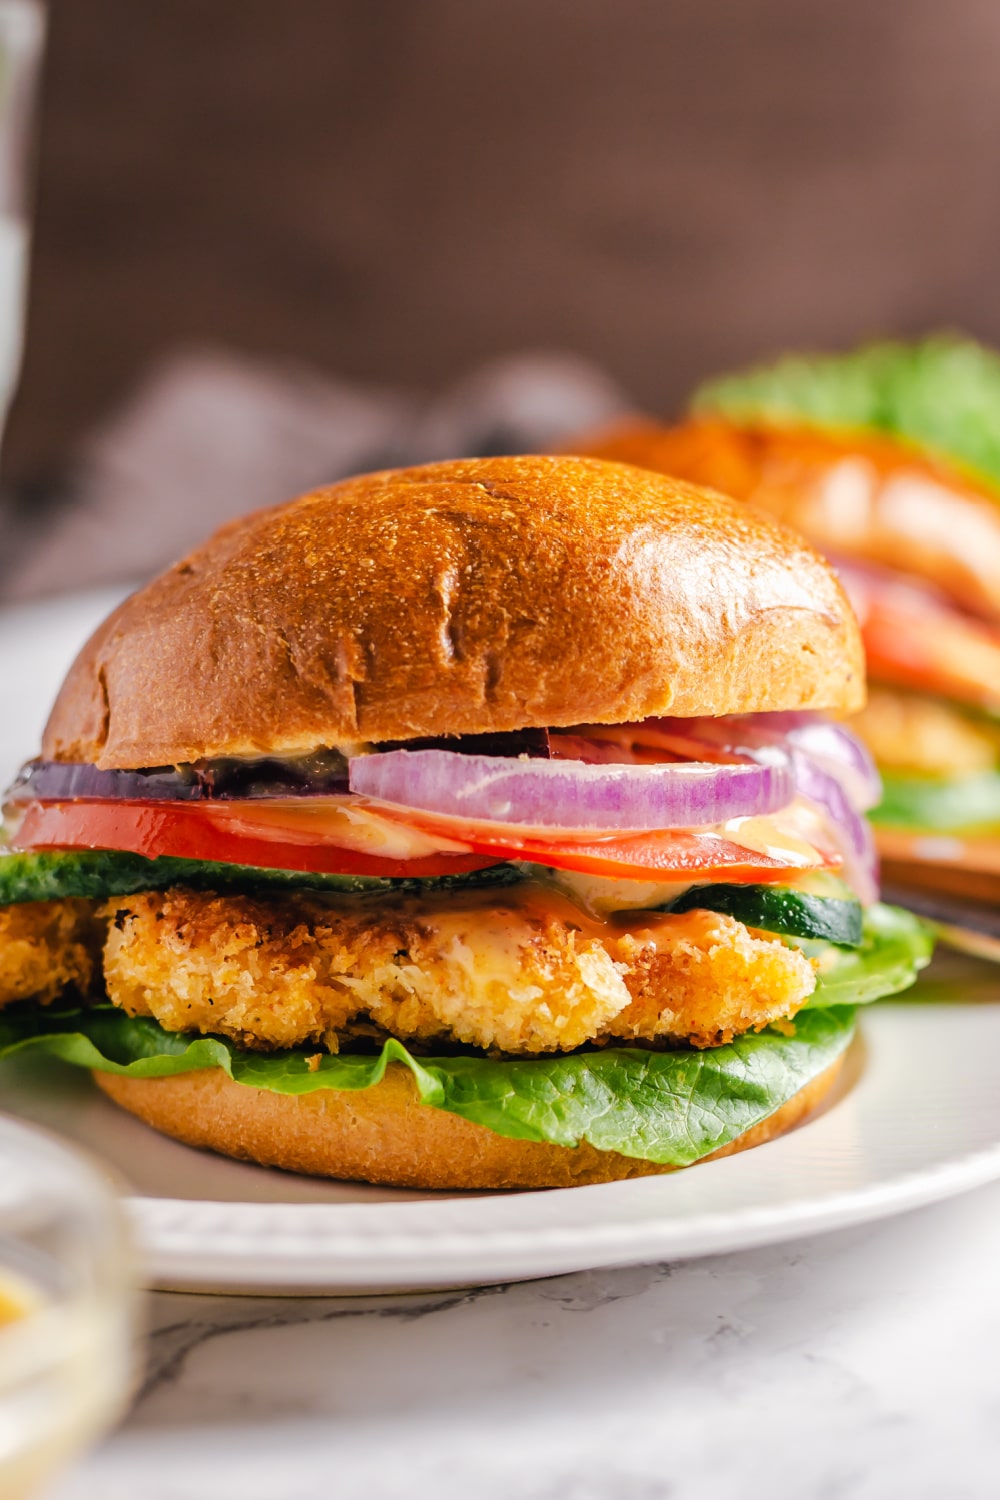 Crispy Chicken Sandwich garnished with red onion, tomatoes and lettuce on a white plate.